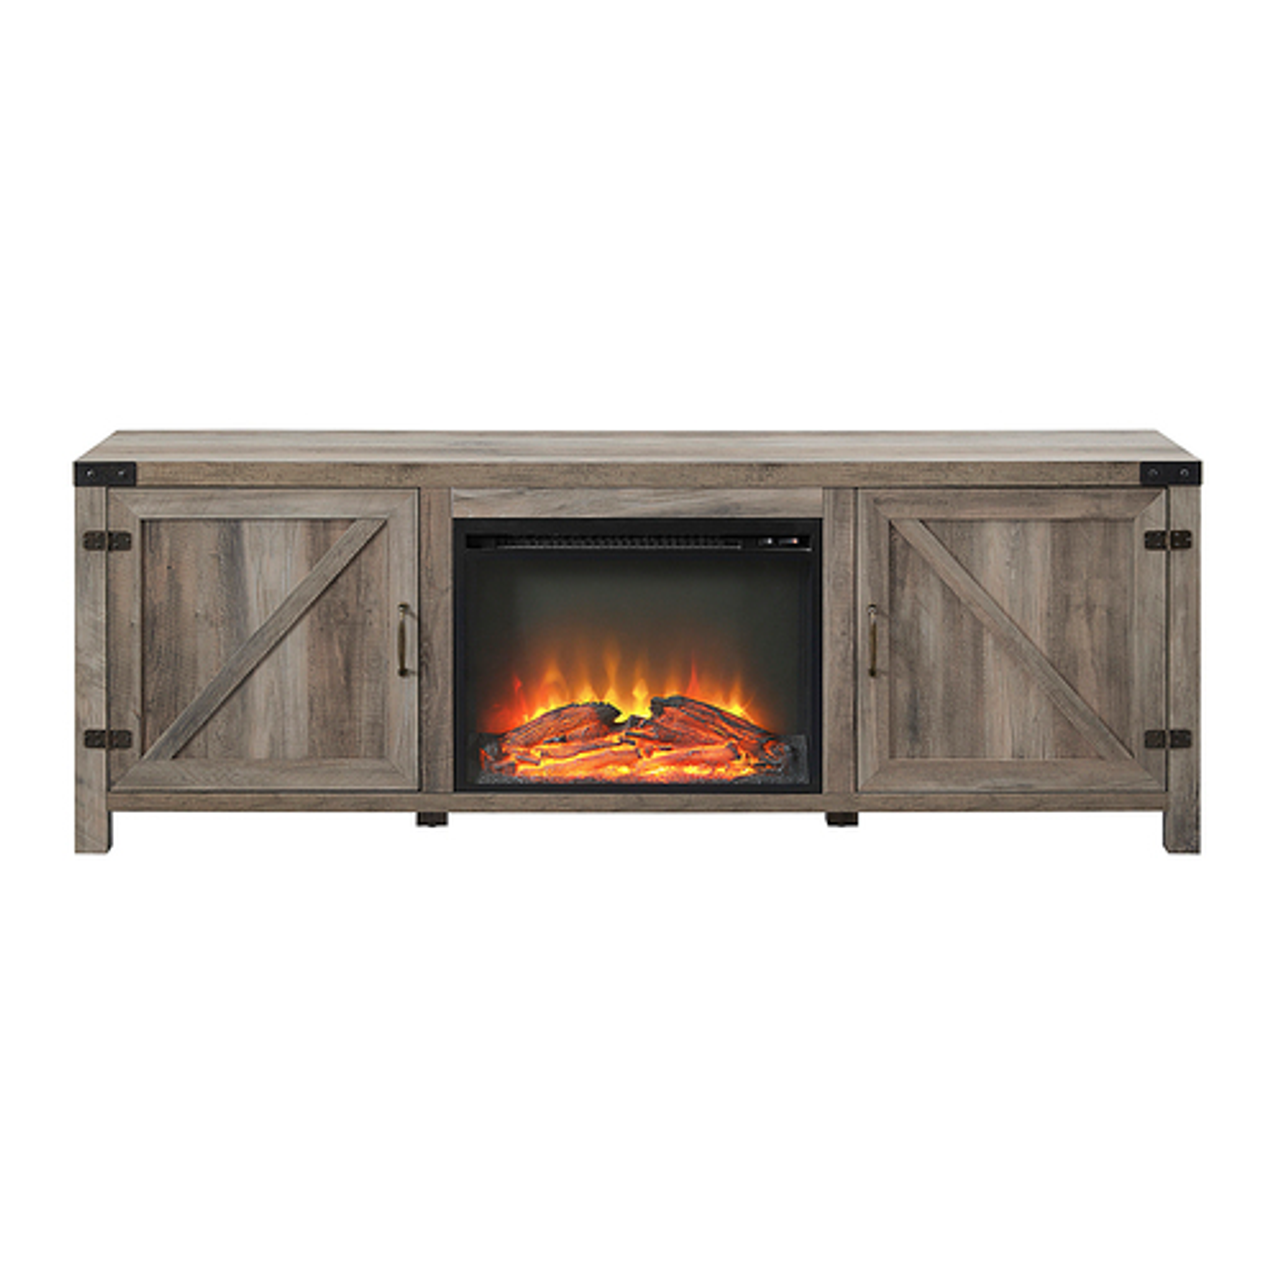 Walker Edison - 70” Barn Door Fireplace TV Stand for TVs up to 80” - Grey Wash